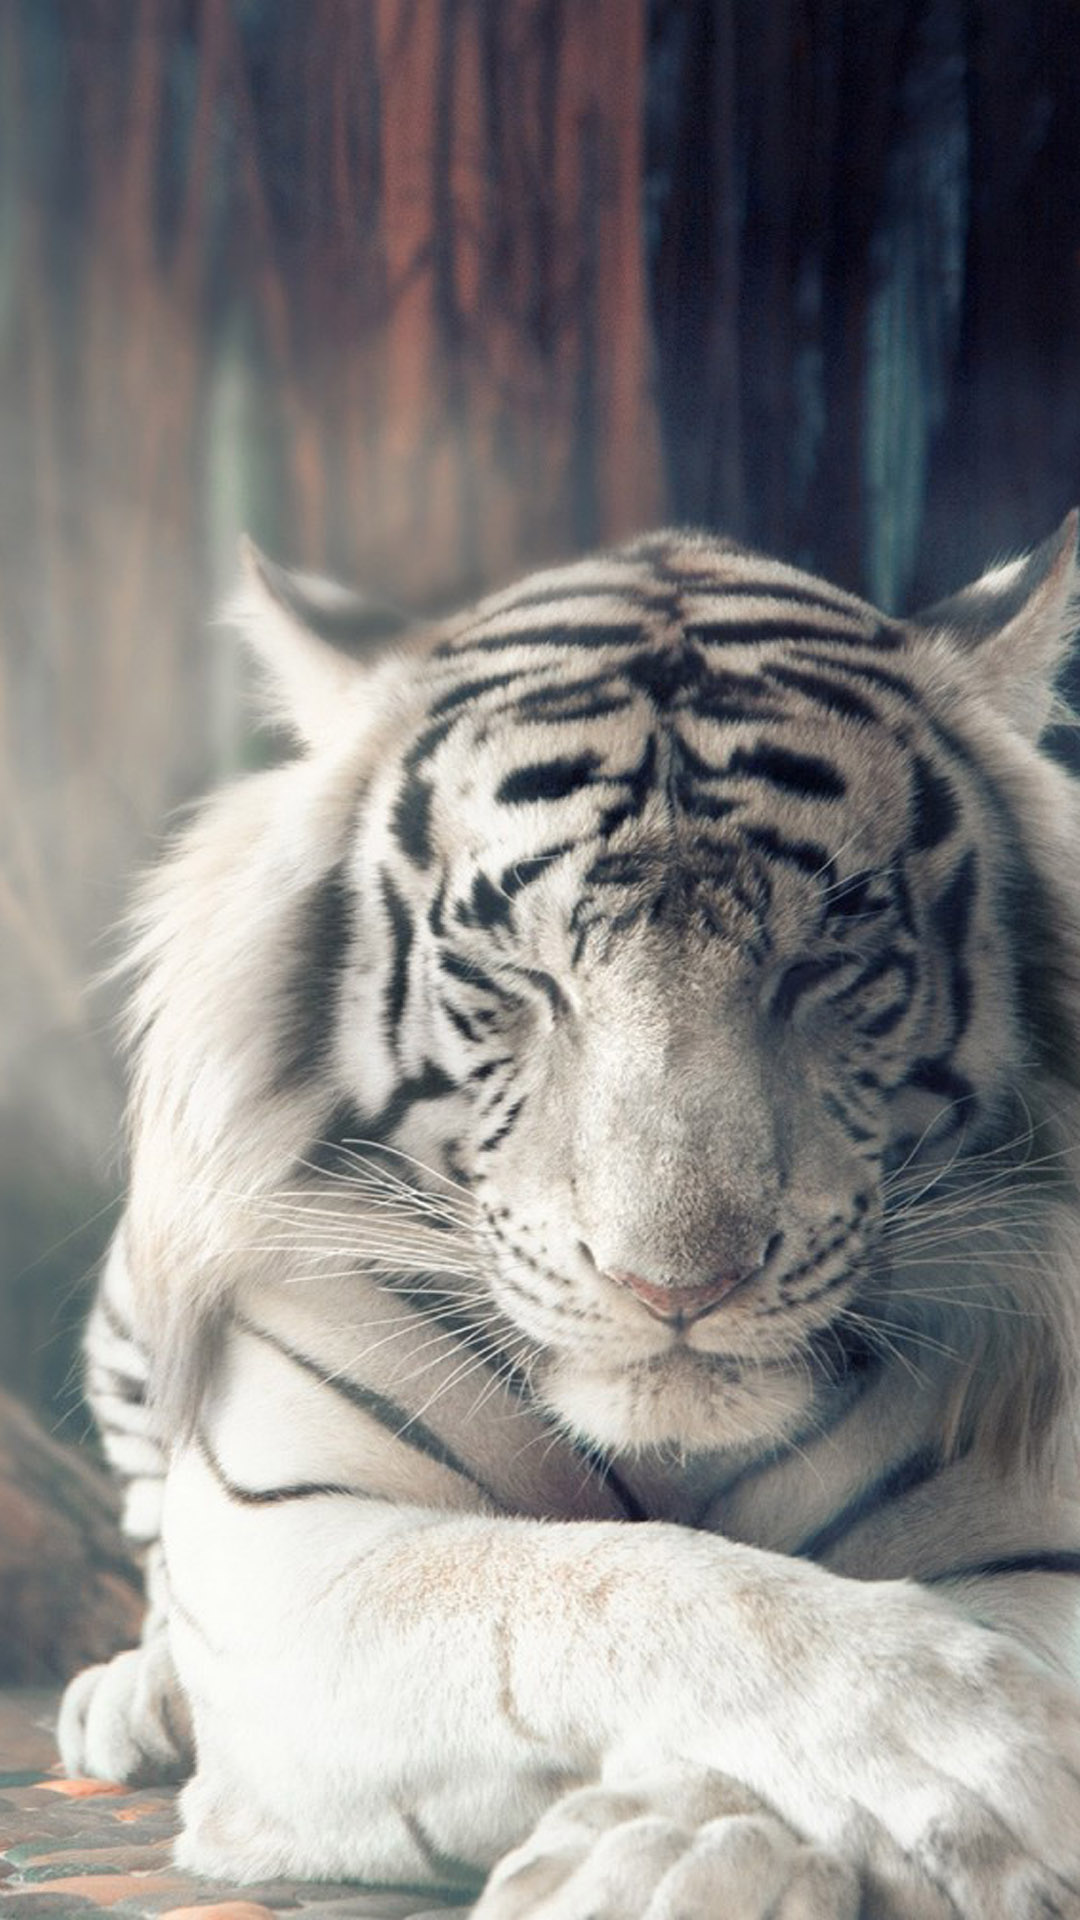 Beautiful Tigers Wallpapers For Mobile  Hd Tiger Wallpapers For Mobile   1242x2688 Wallpaper  teahubio